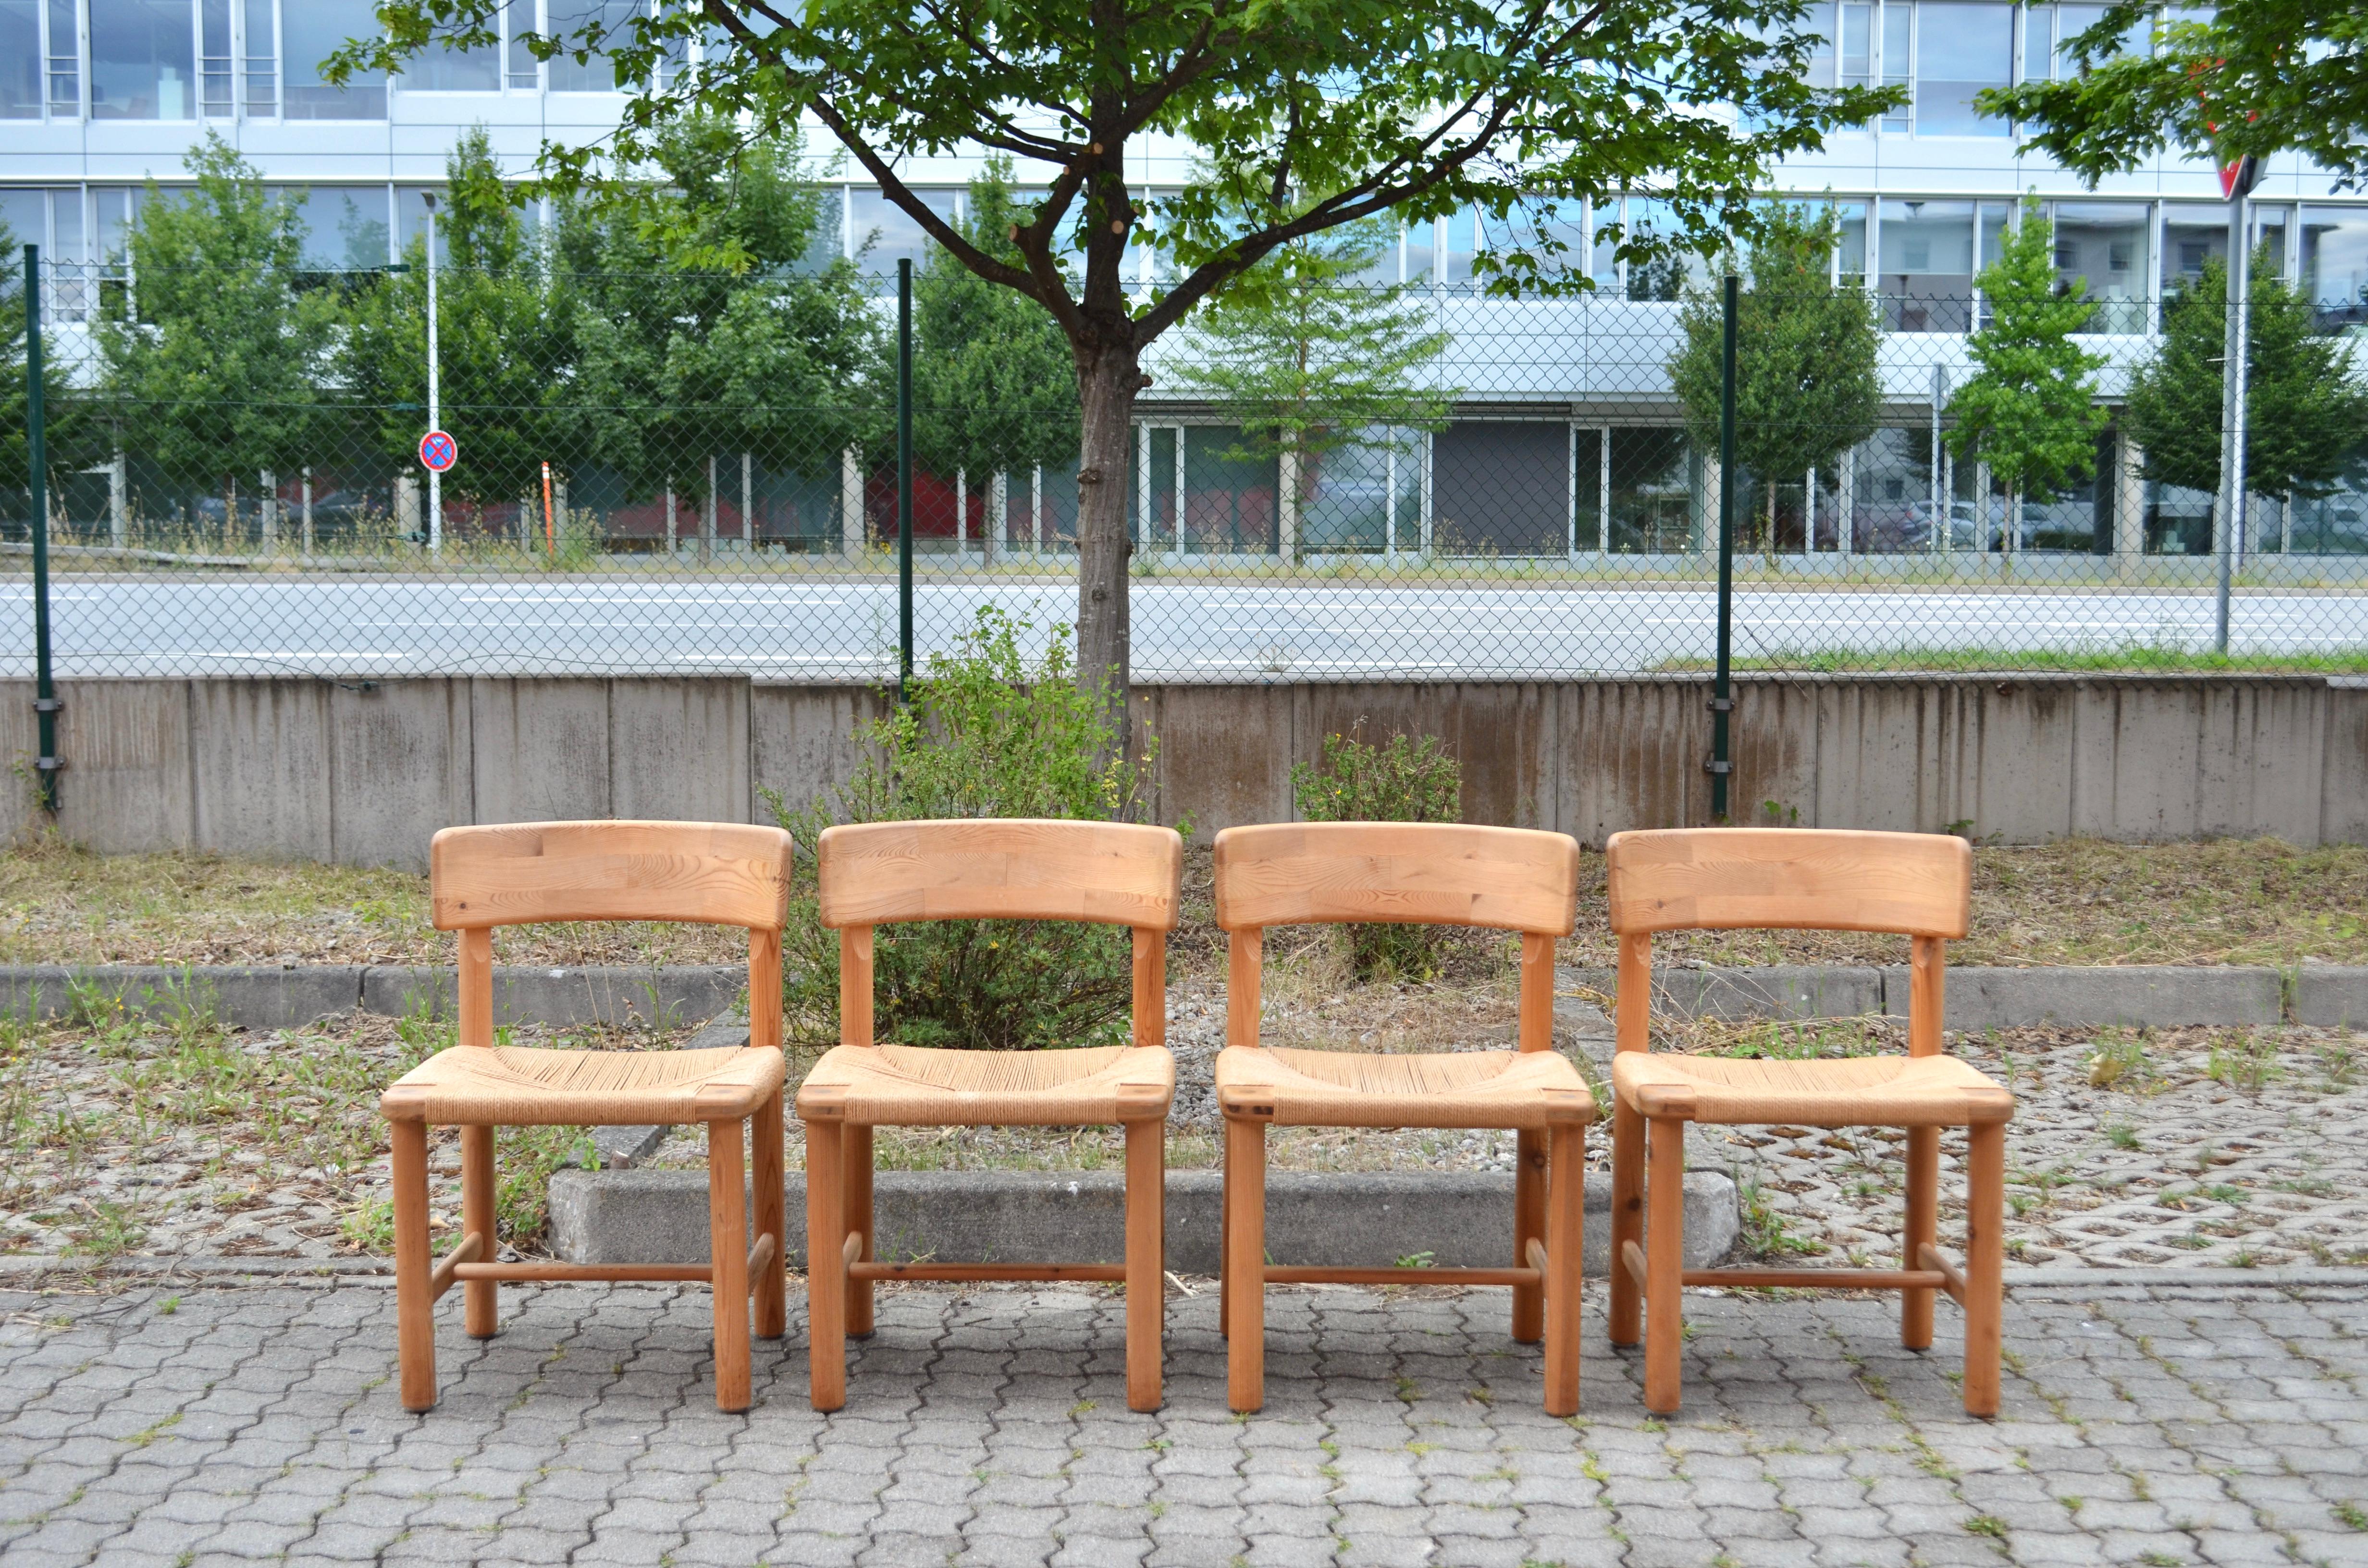 Dining chairs designed by Rainer Daumiller and manufactured by Hirtshals Savvaerk.
Model with papercord.
Solid scandinavian pine wood which is beautiful patinated.
These chairs are very comfortable.

Set of 4 chairs.

Dimensions for each